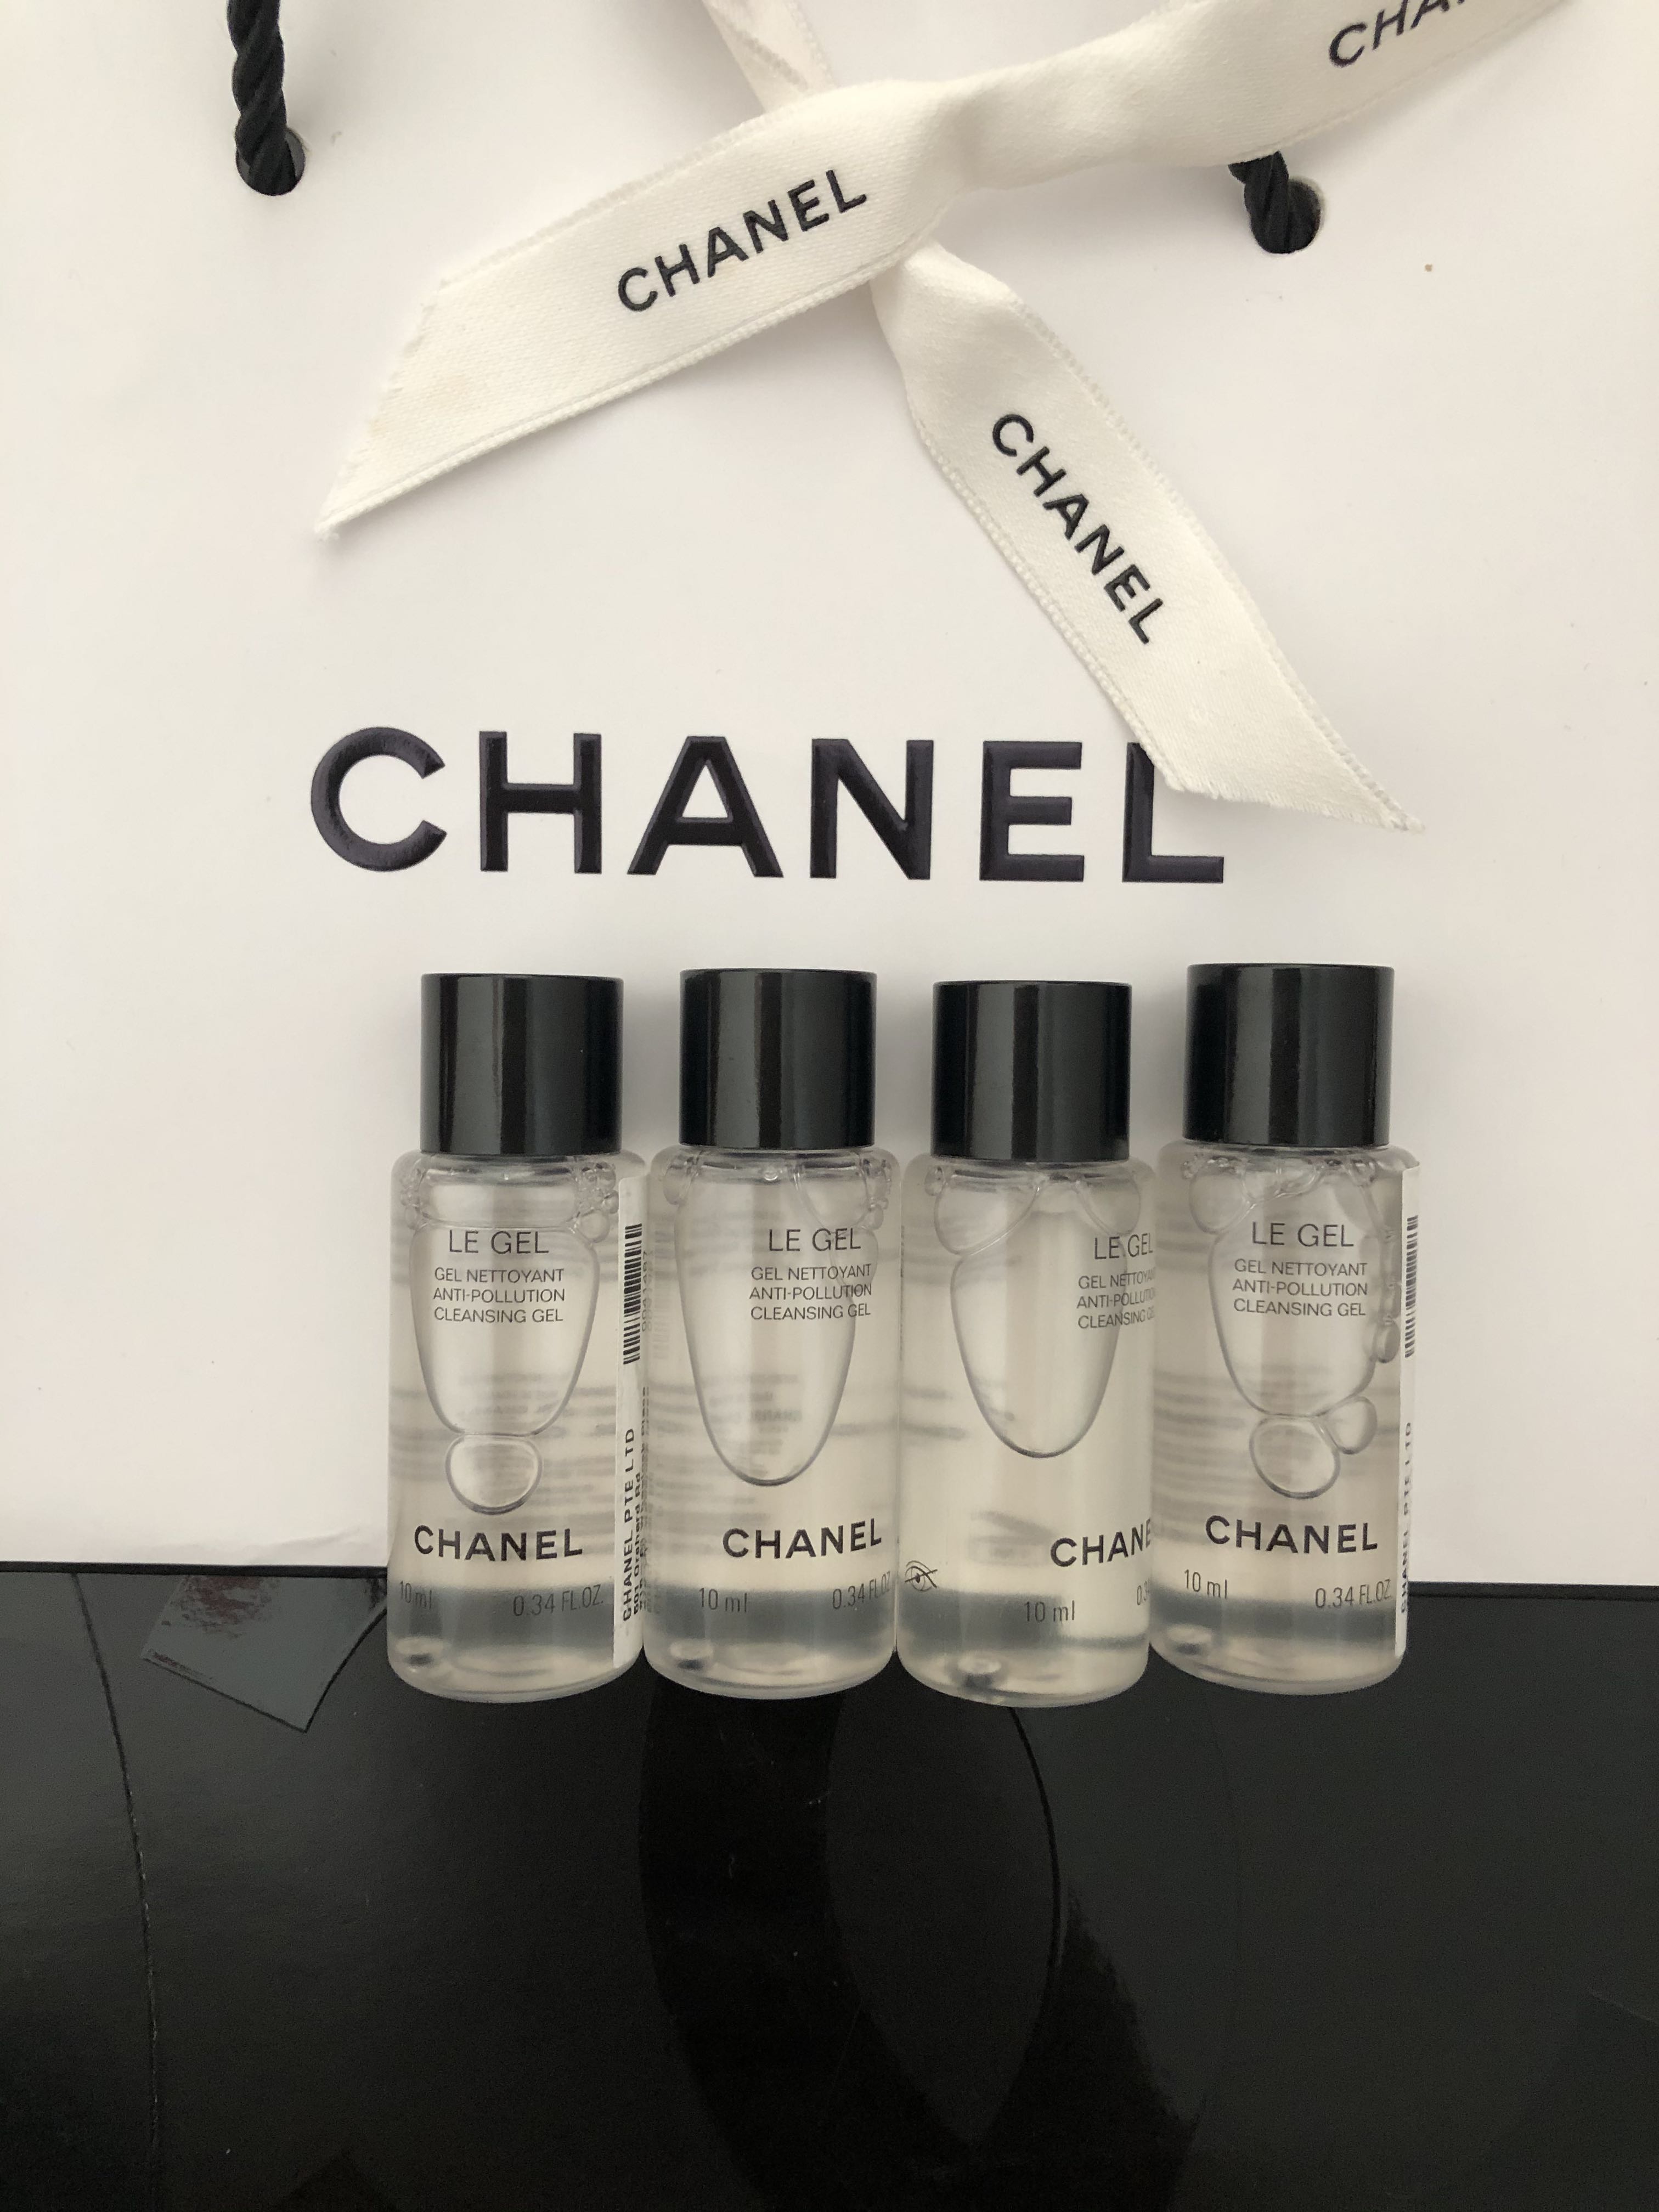 Chanel Sublimage Skincare  New Additions  The Beauty Look Book